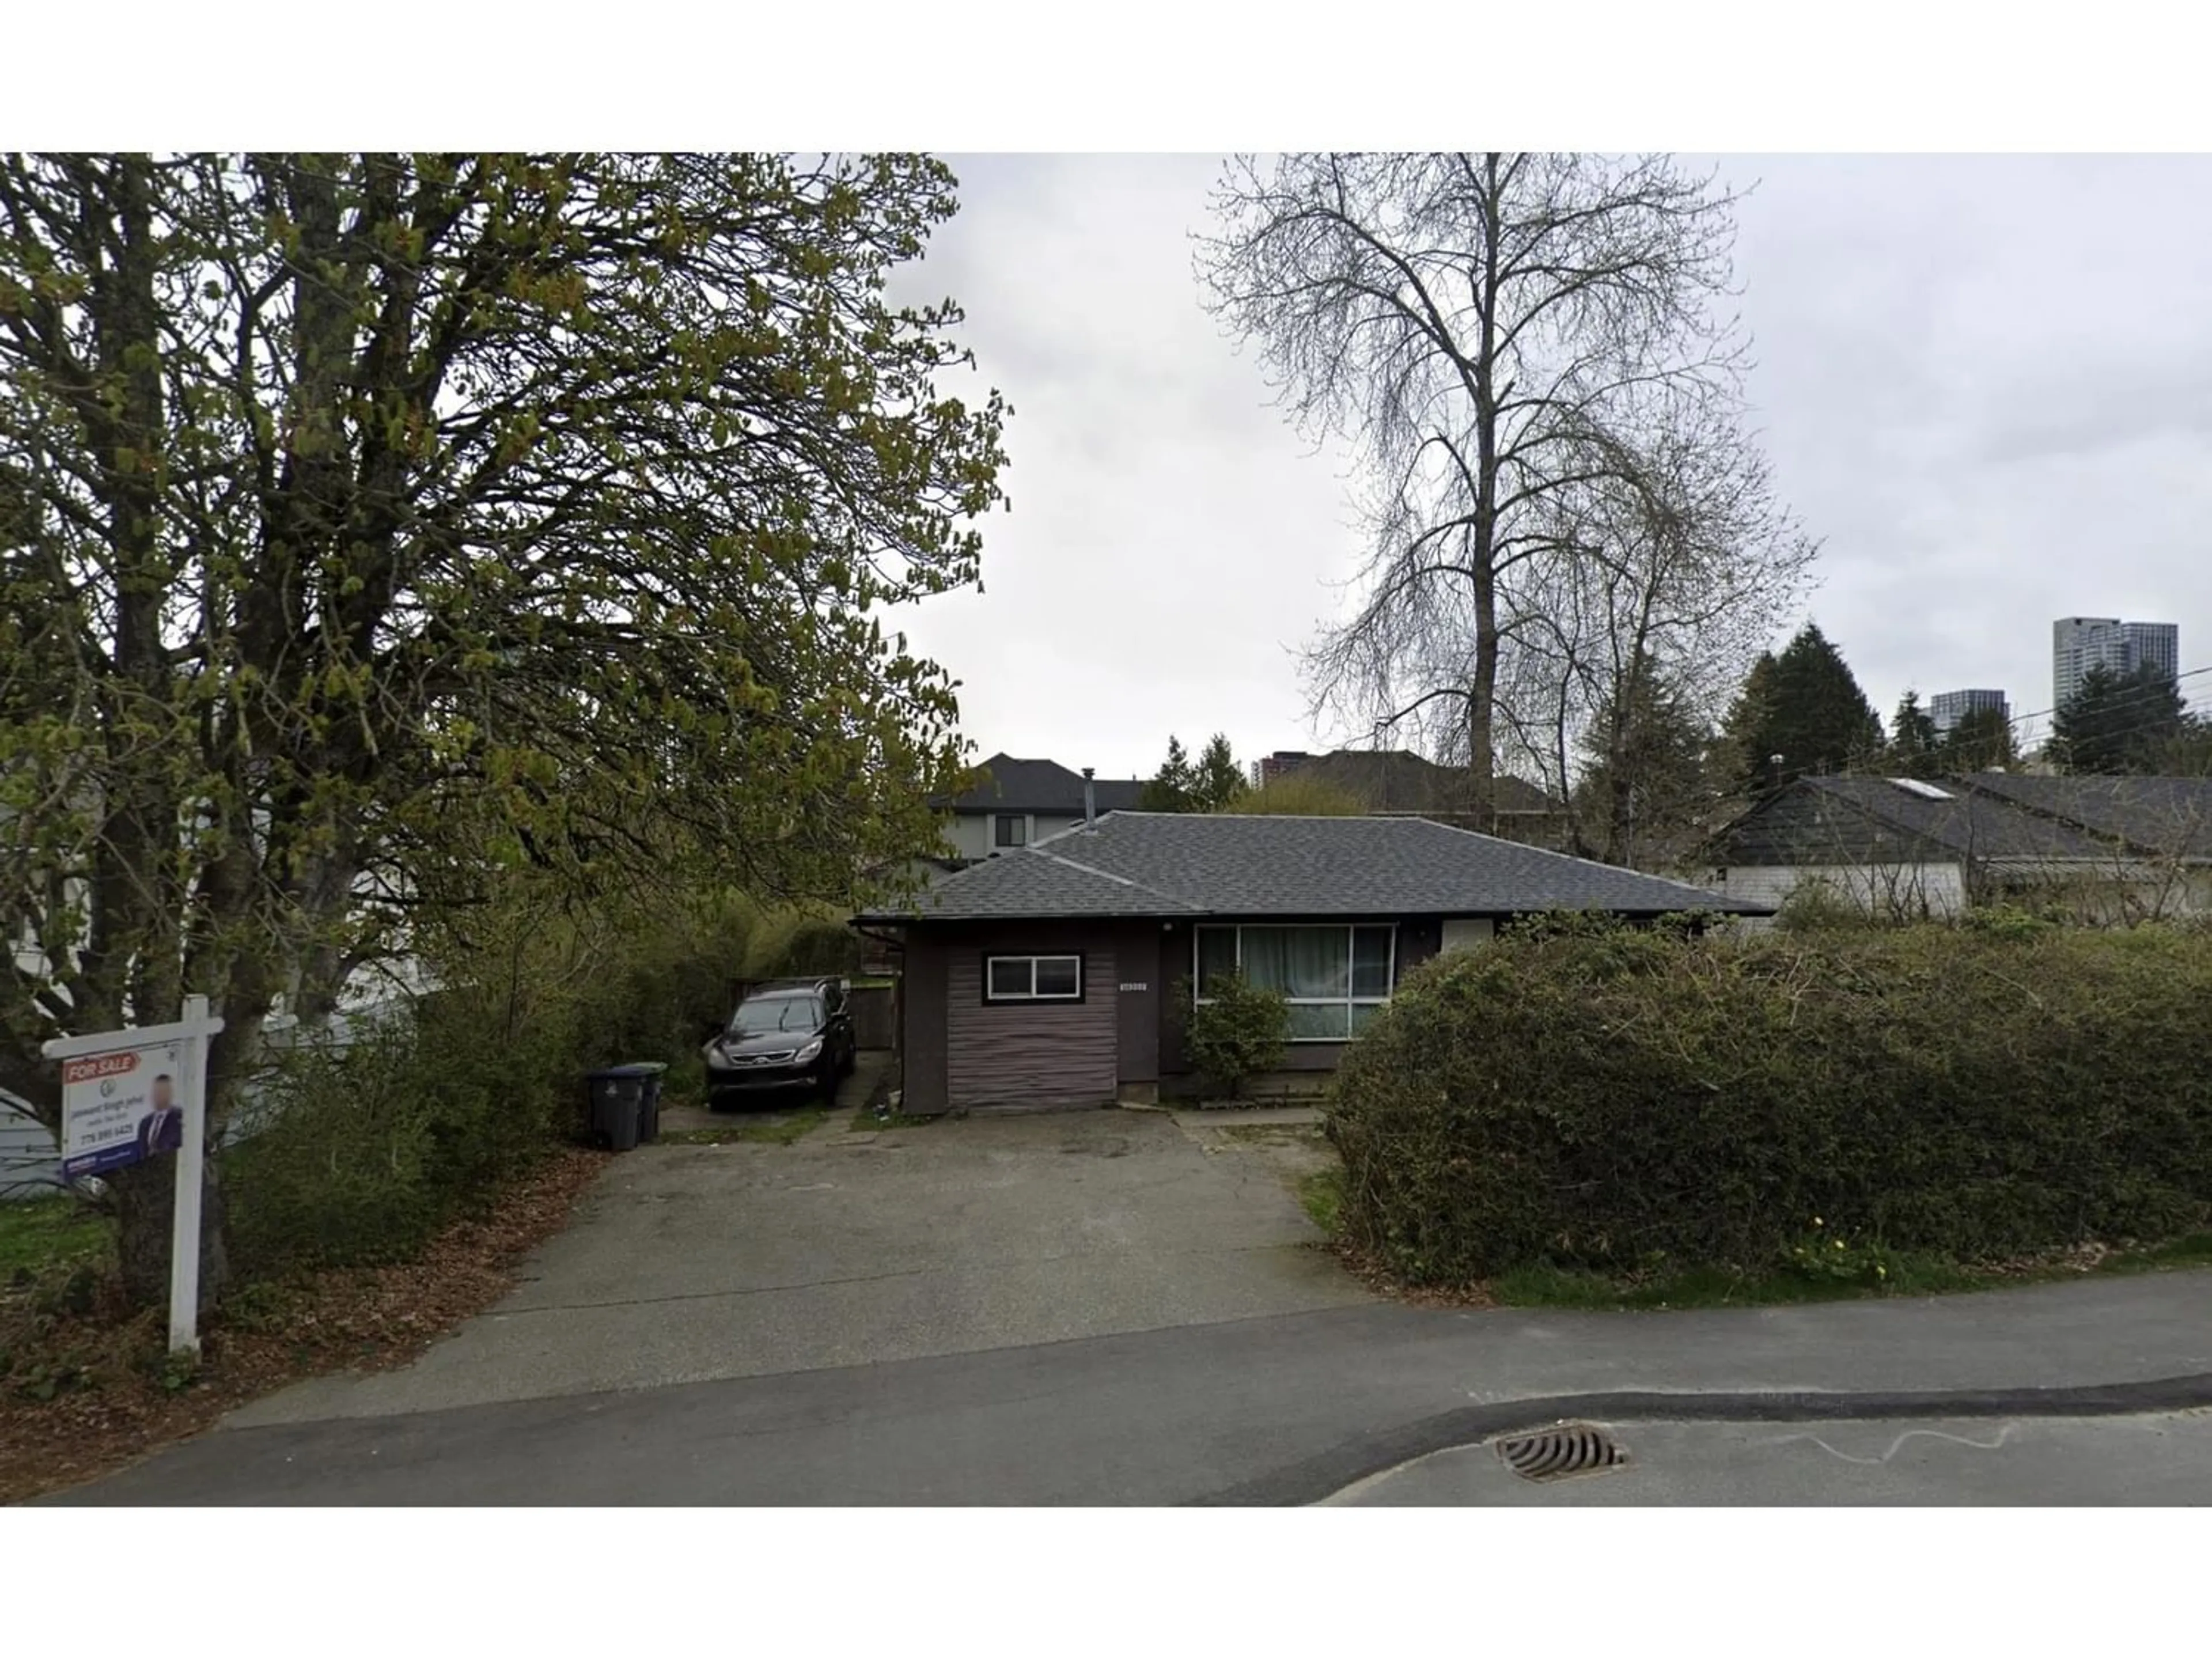 Frontside or backside of a home for 10702 132 STREET, Surrey British Columbia V3T3W3